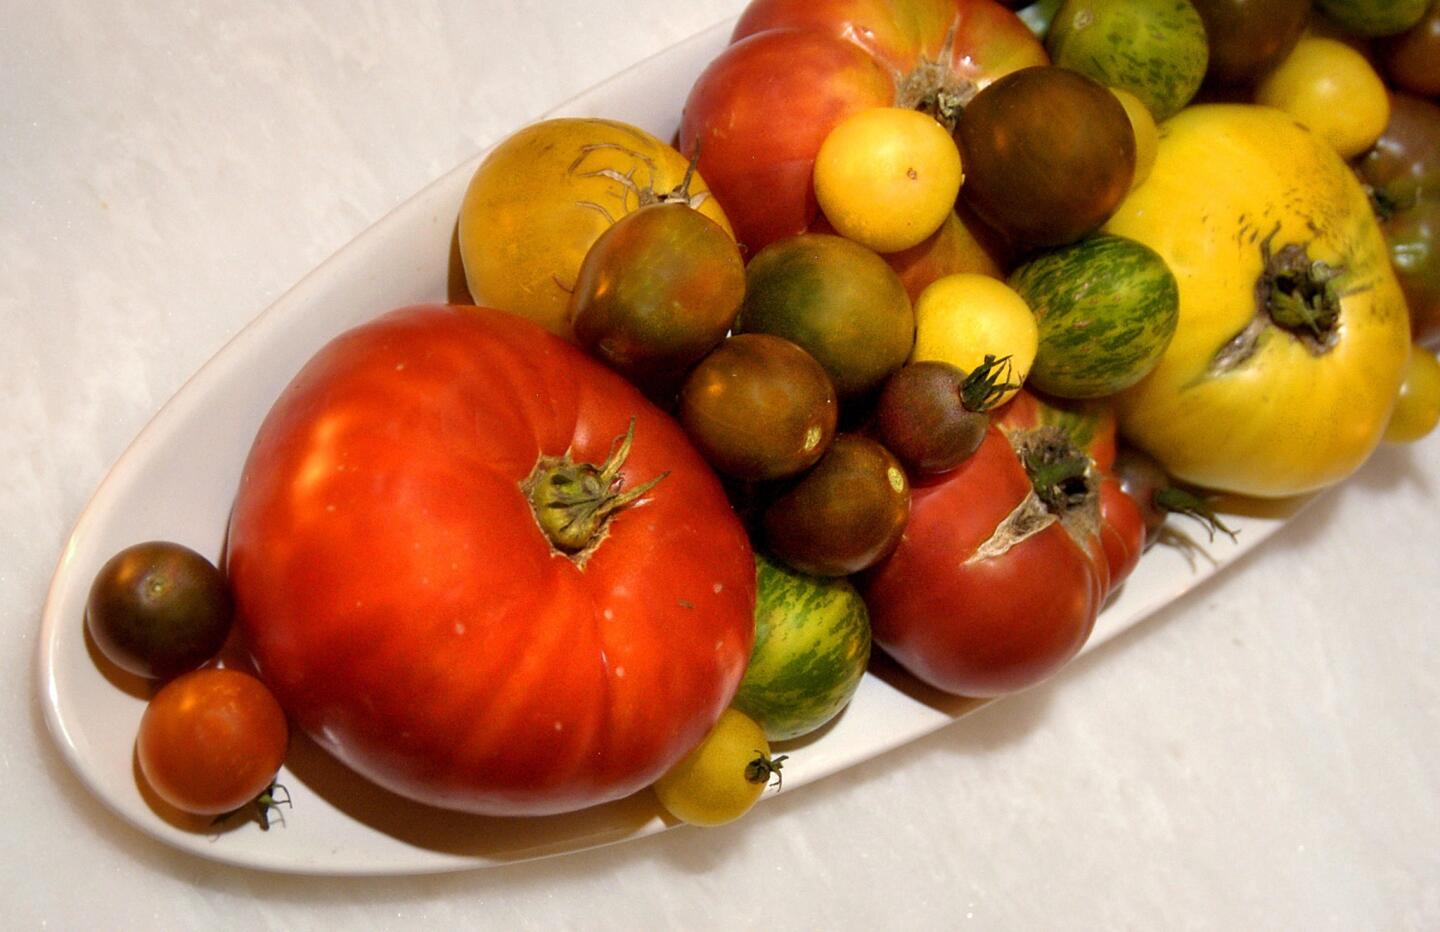 A selection of chef Sal Marino's home grown tomatoes are displayed at the restaurant. Il Grano features a seasonal tomato tasting menu.